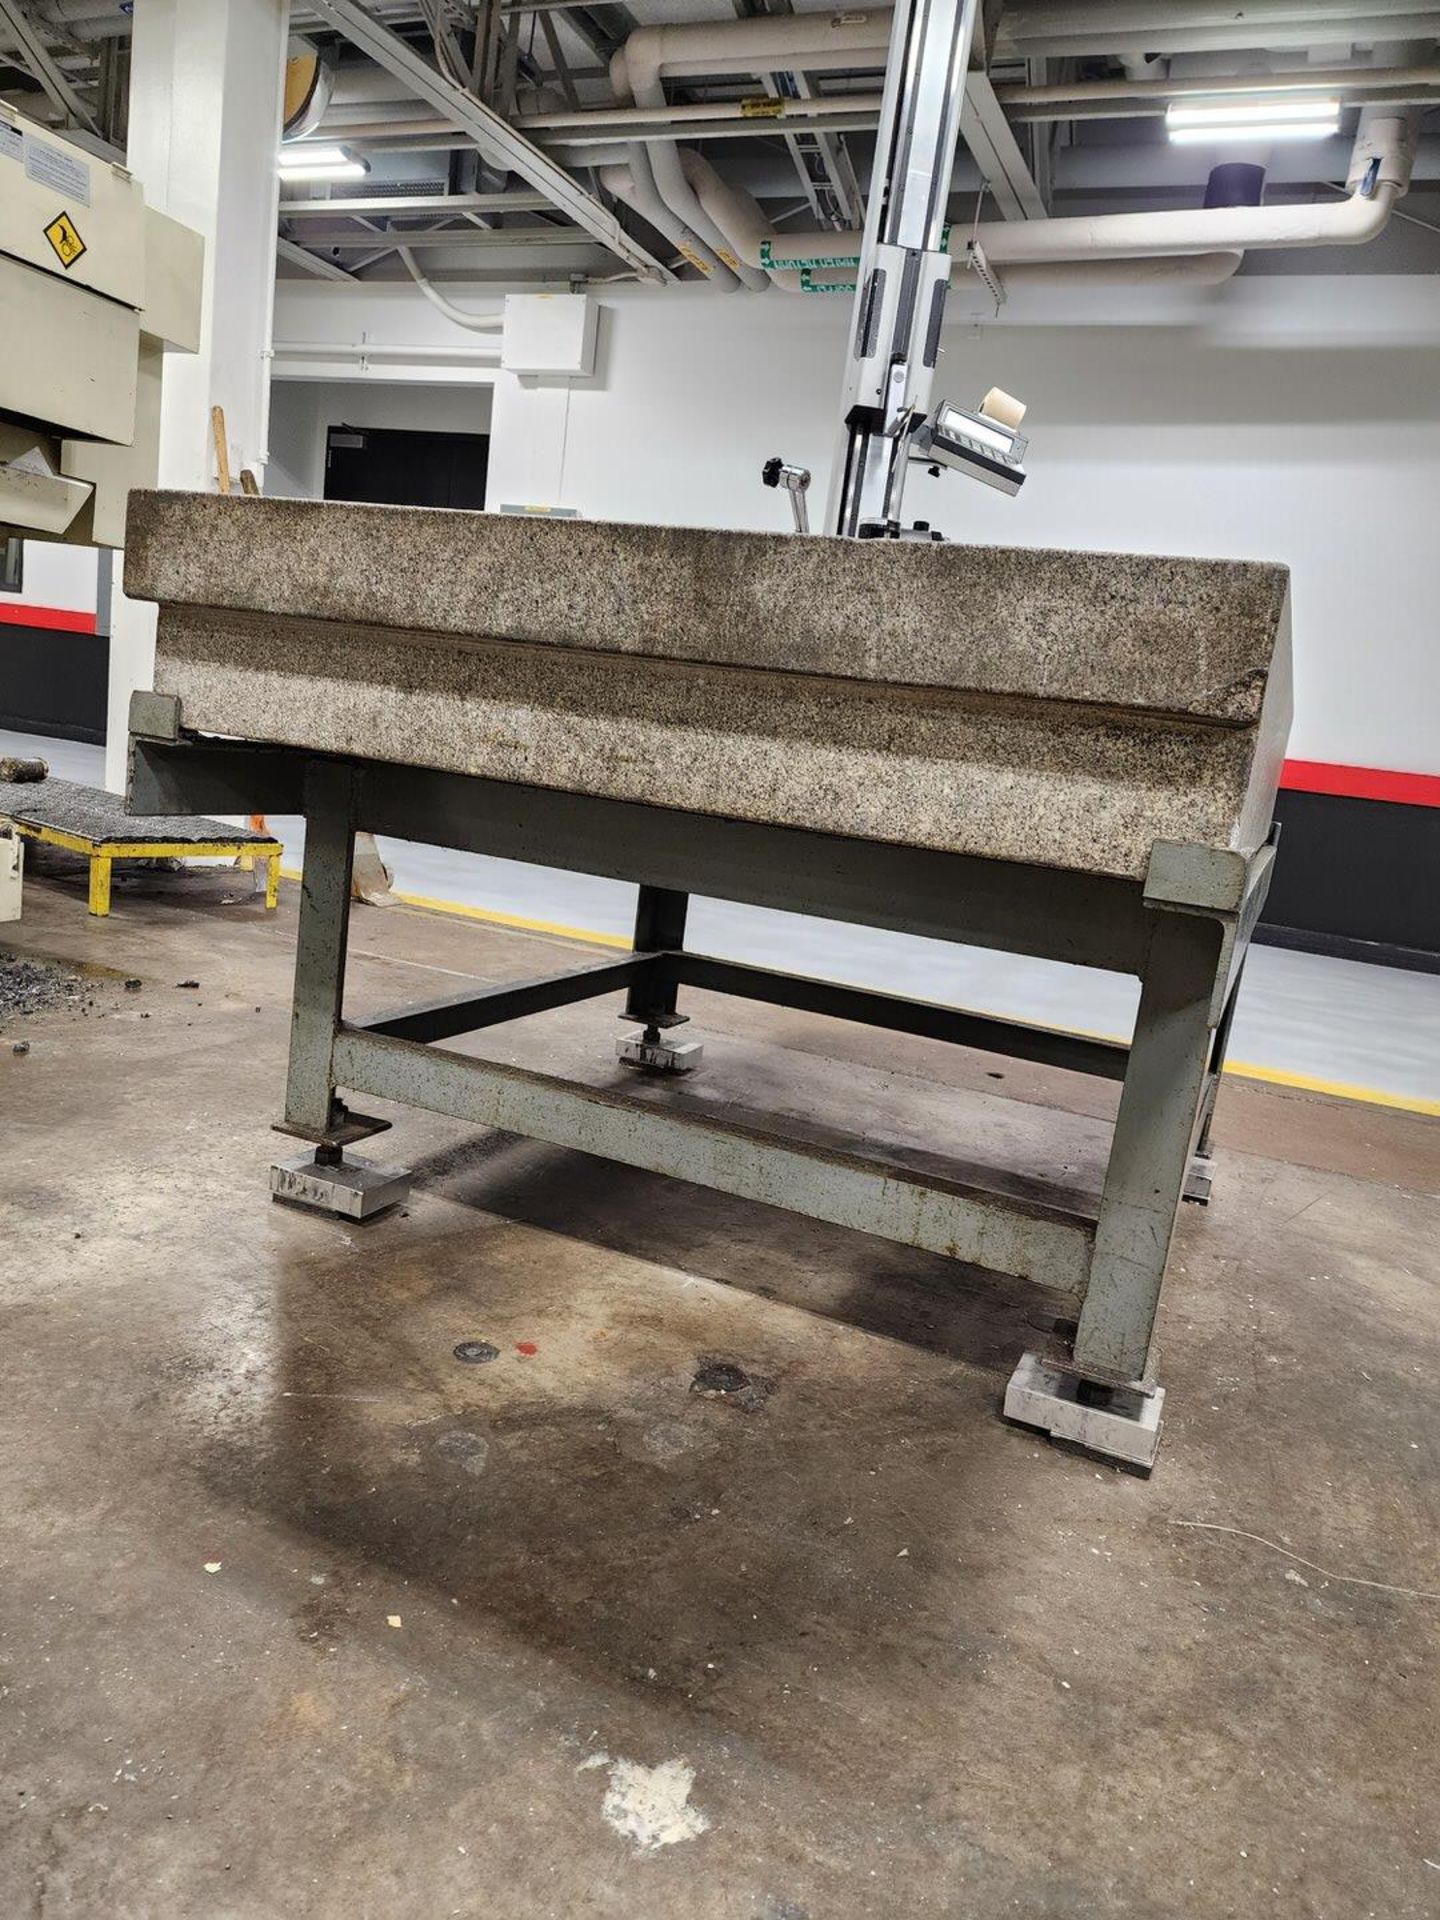 Surface Granite Plate W/ Stand 72"x48" - Image 4 of 5